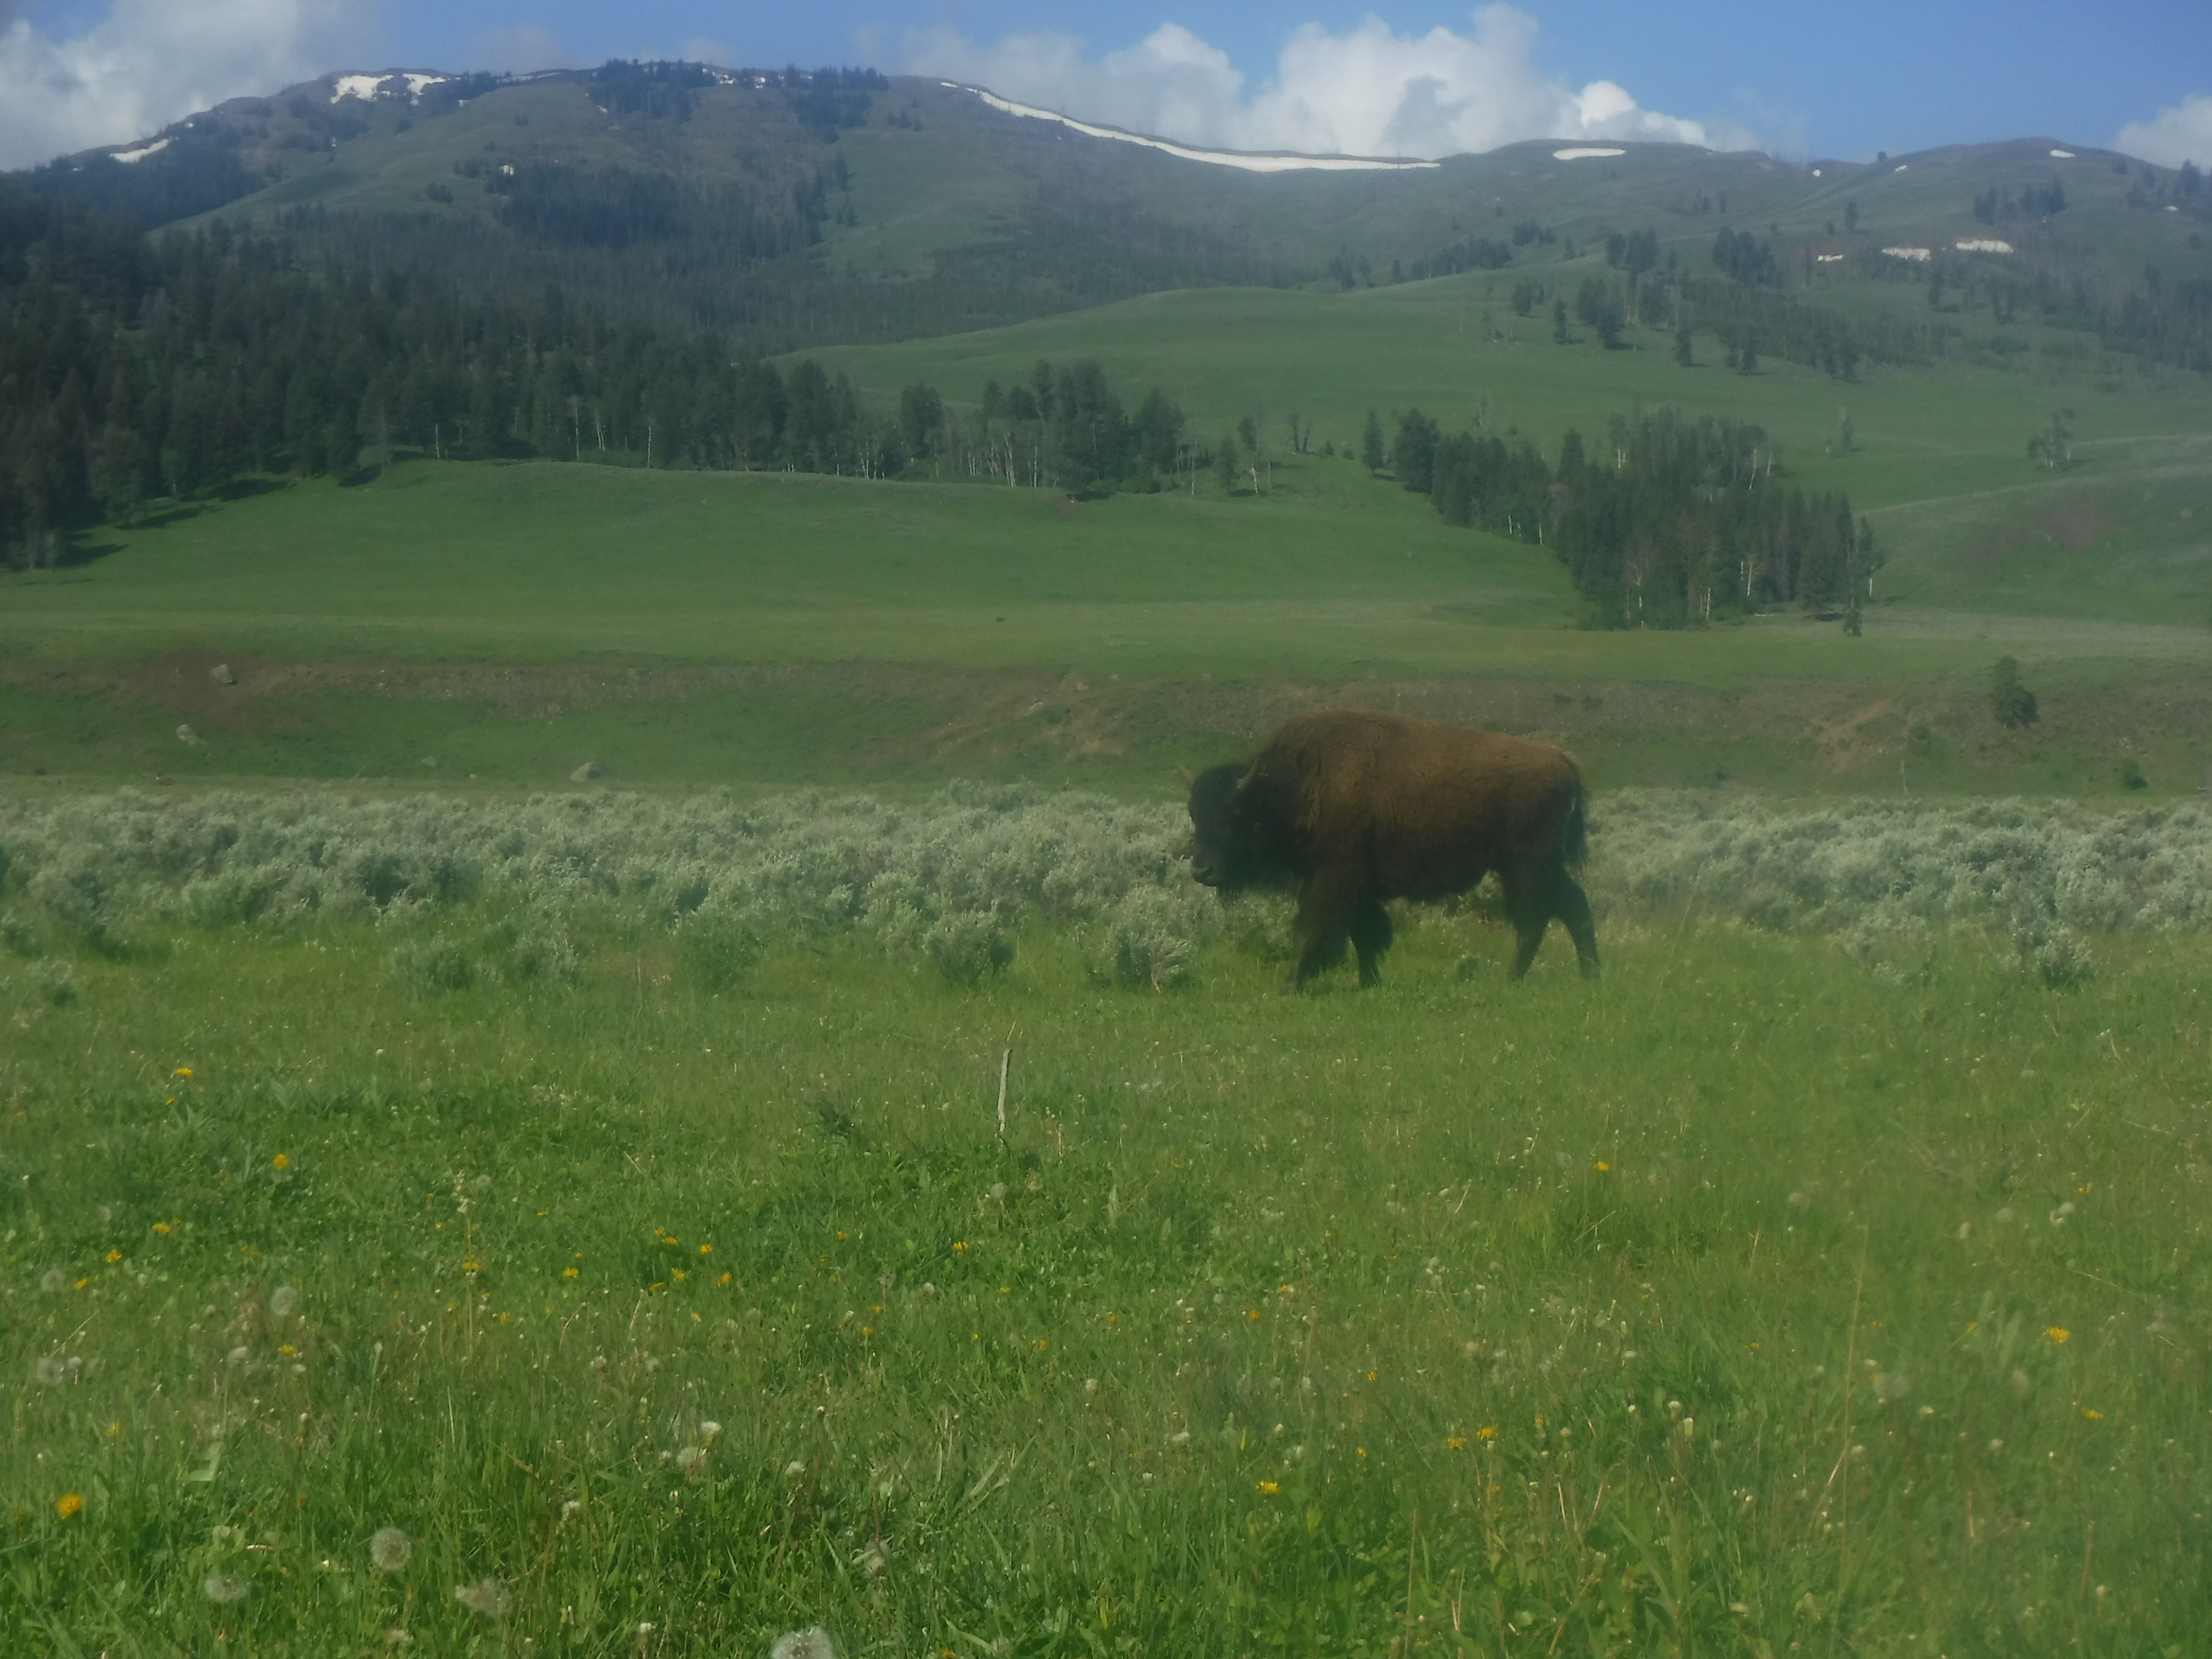 Bison roaming in Yellowstone National Park study site.